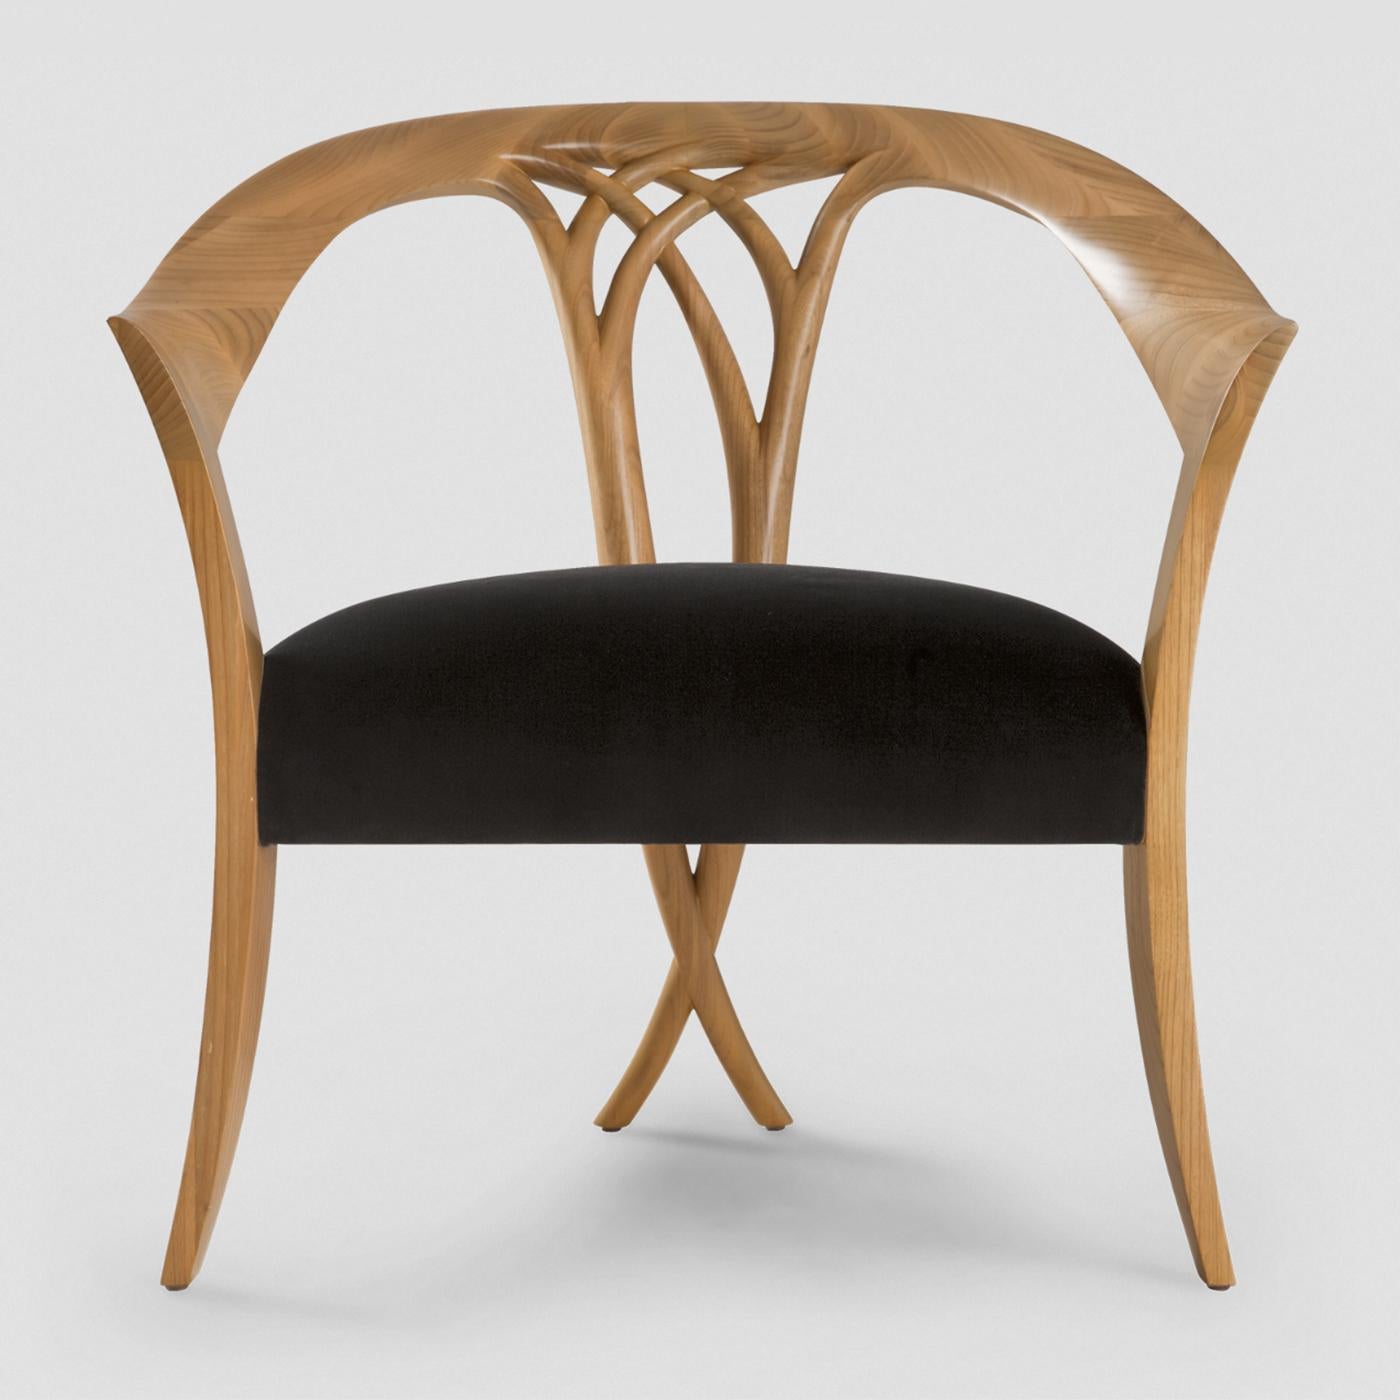 Chair Lord with hand carved structure in solid wood
polished and natural varnished, with upholstered seat 
covered with black Jet fabric.
Also available in black or white lacquered or in natural
tabac finish. Also available with other fabrics on